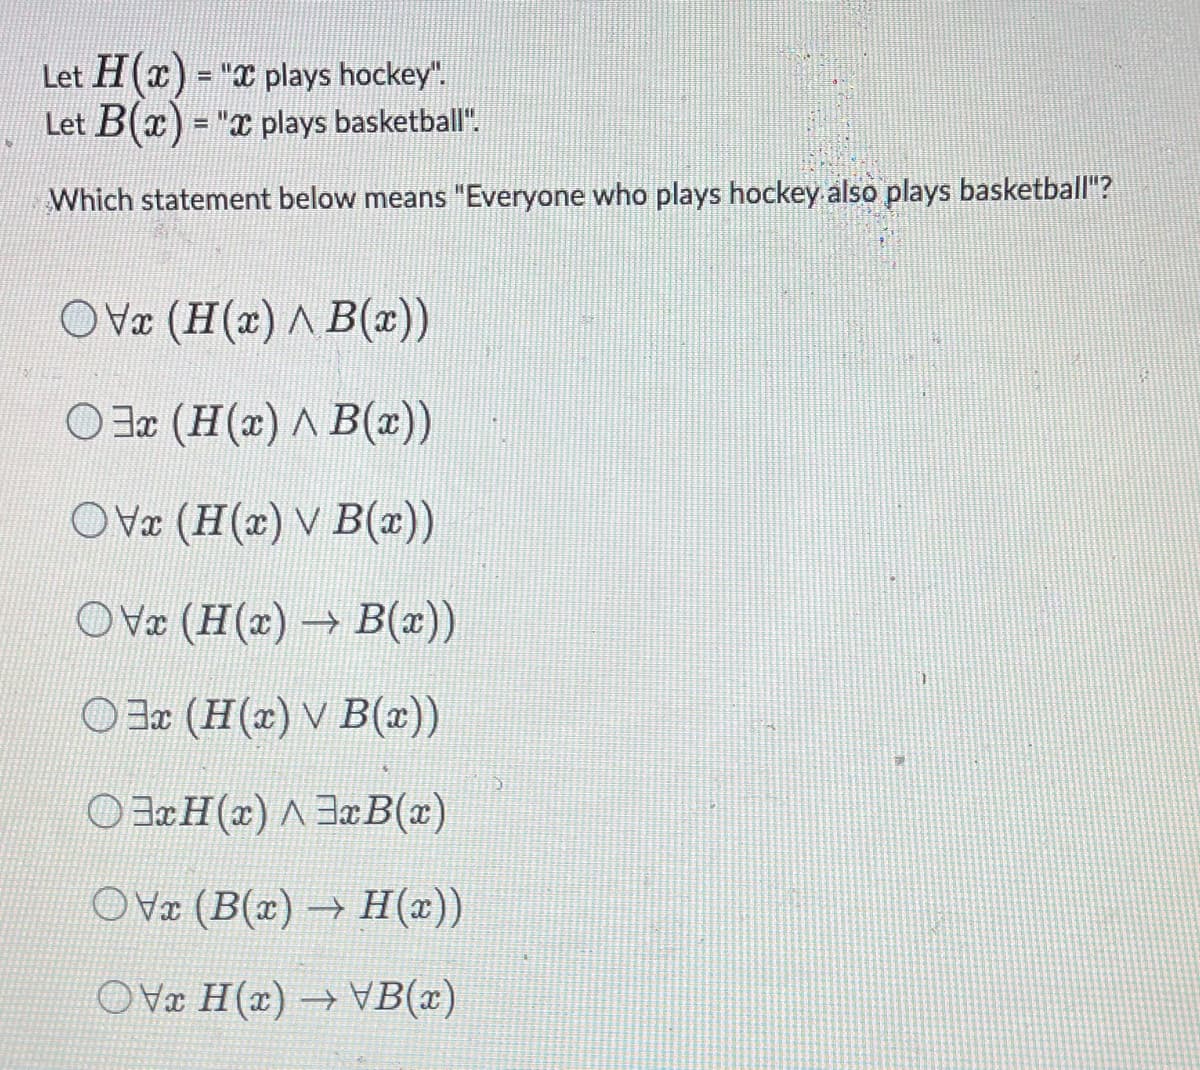 Let H(x) = " plays hockey".
Let B(x) = "x plays basketball".
Which statement below means "Everyone who plays hockey also plays basketball"?
OVx (H(x) ^ B(x))
Ox (H(x) ^ B(x))
OVx (H(x) v B(x))
Ovx (H(x)→ B(x))
Ox (H(x) v B(x))
OxH(x) 3x B(x)
OVx (B(x)→ H(x))
OVx H(x)→VB(x)